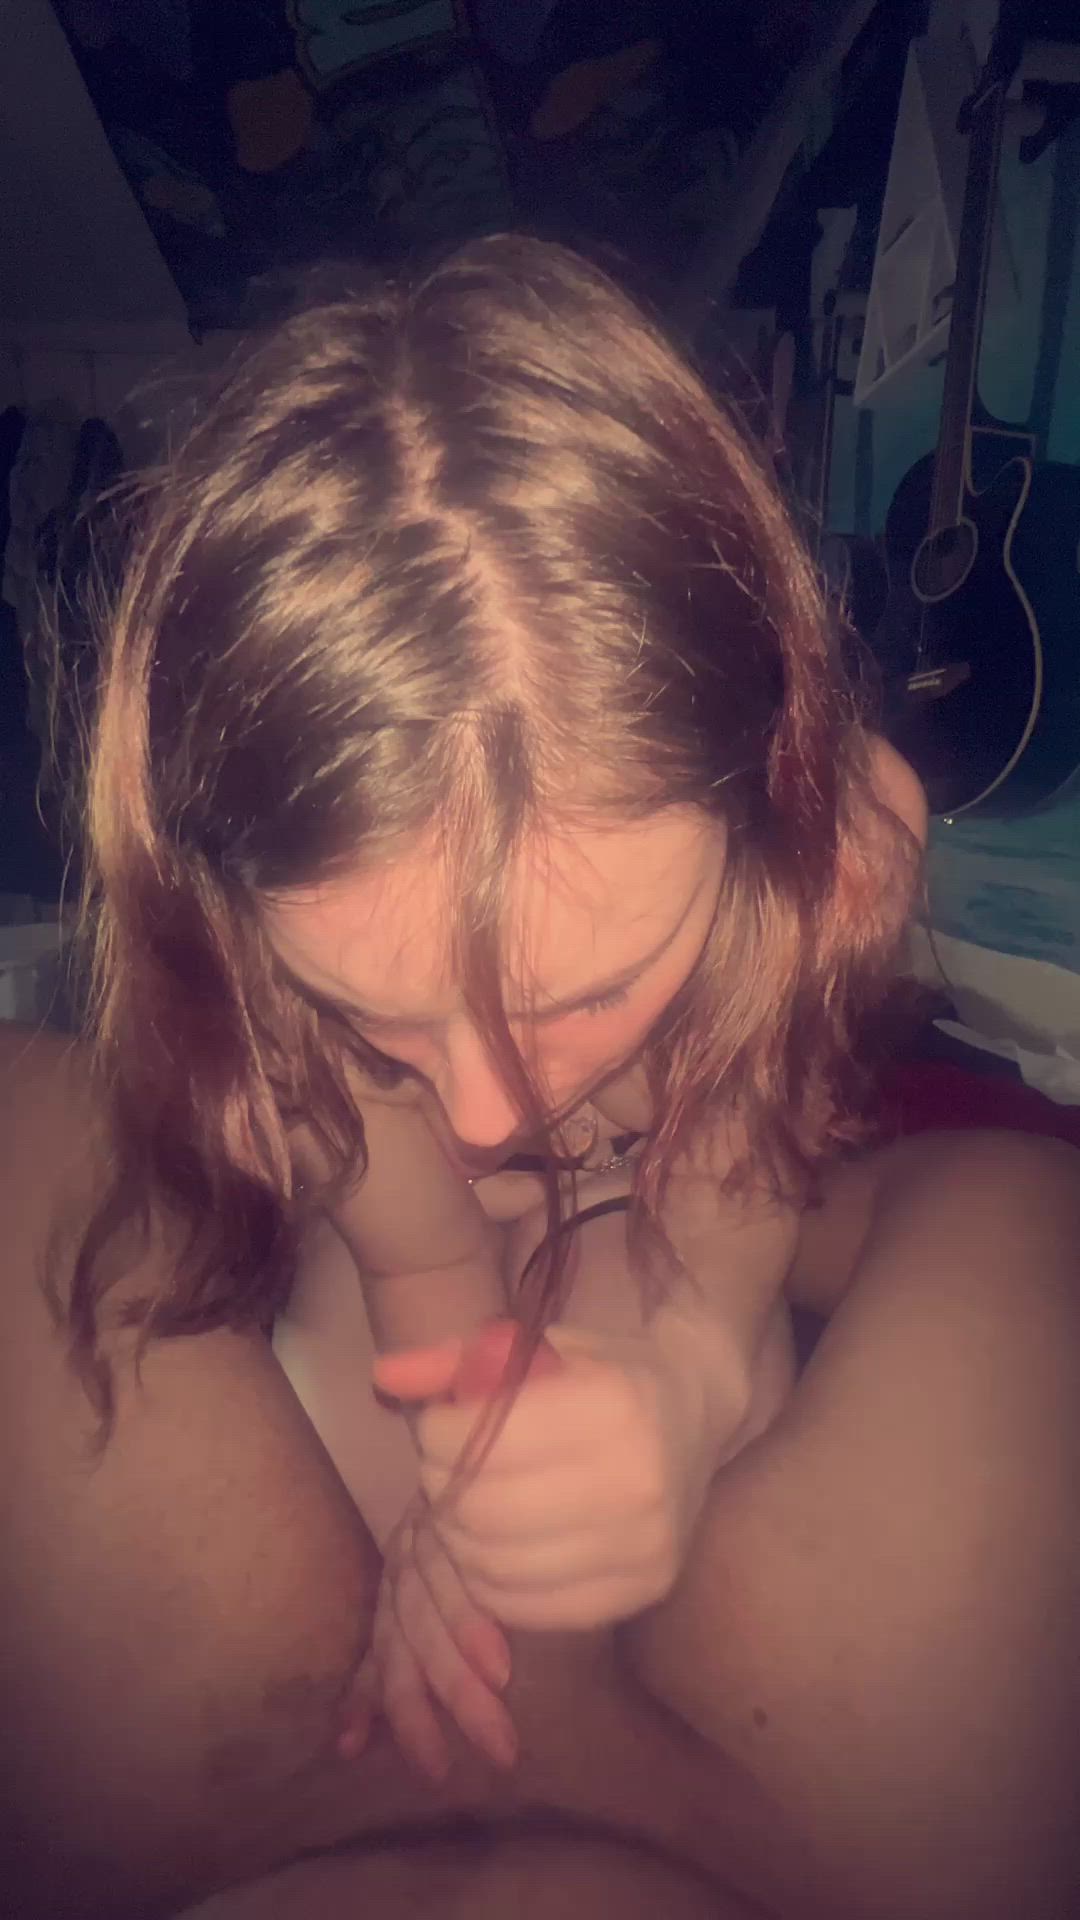 Couple porn video with onlyfans model scarlettrosee <strong>@scarlettrosebudd</strong>